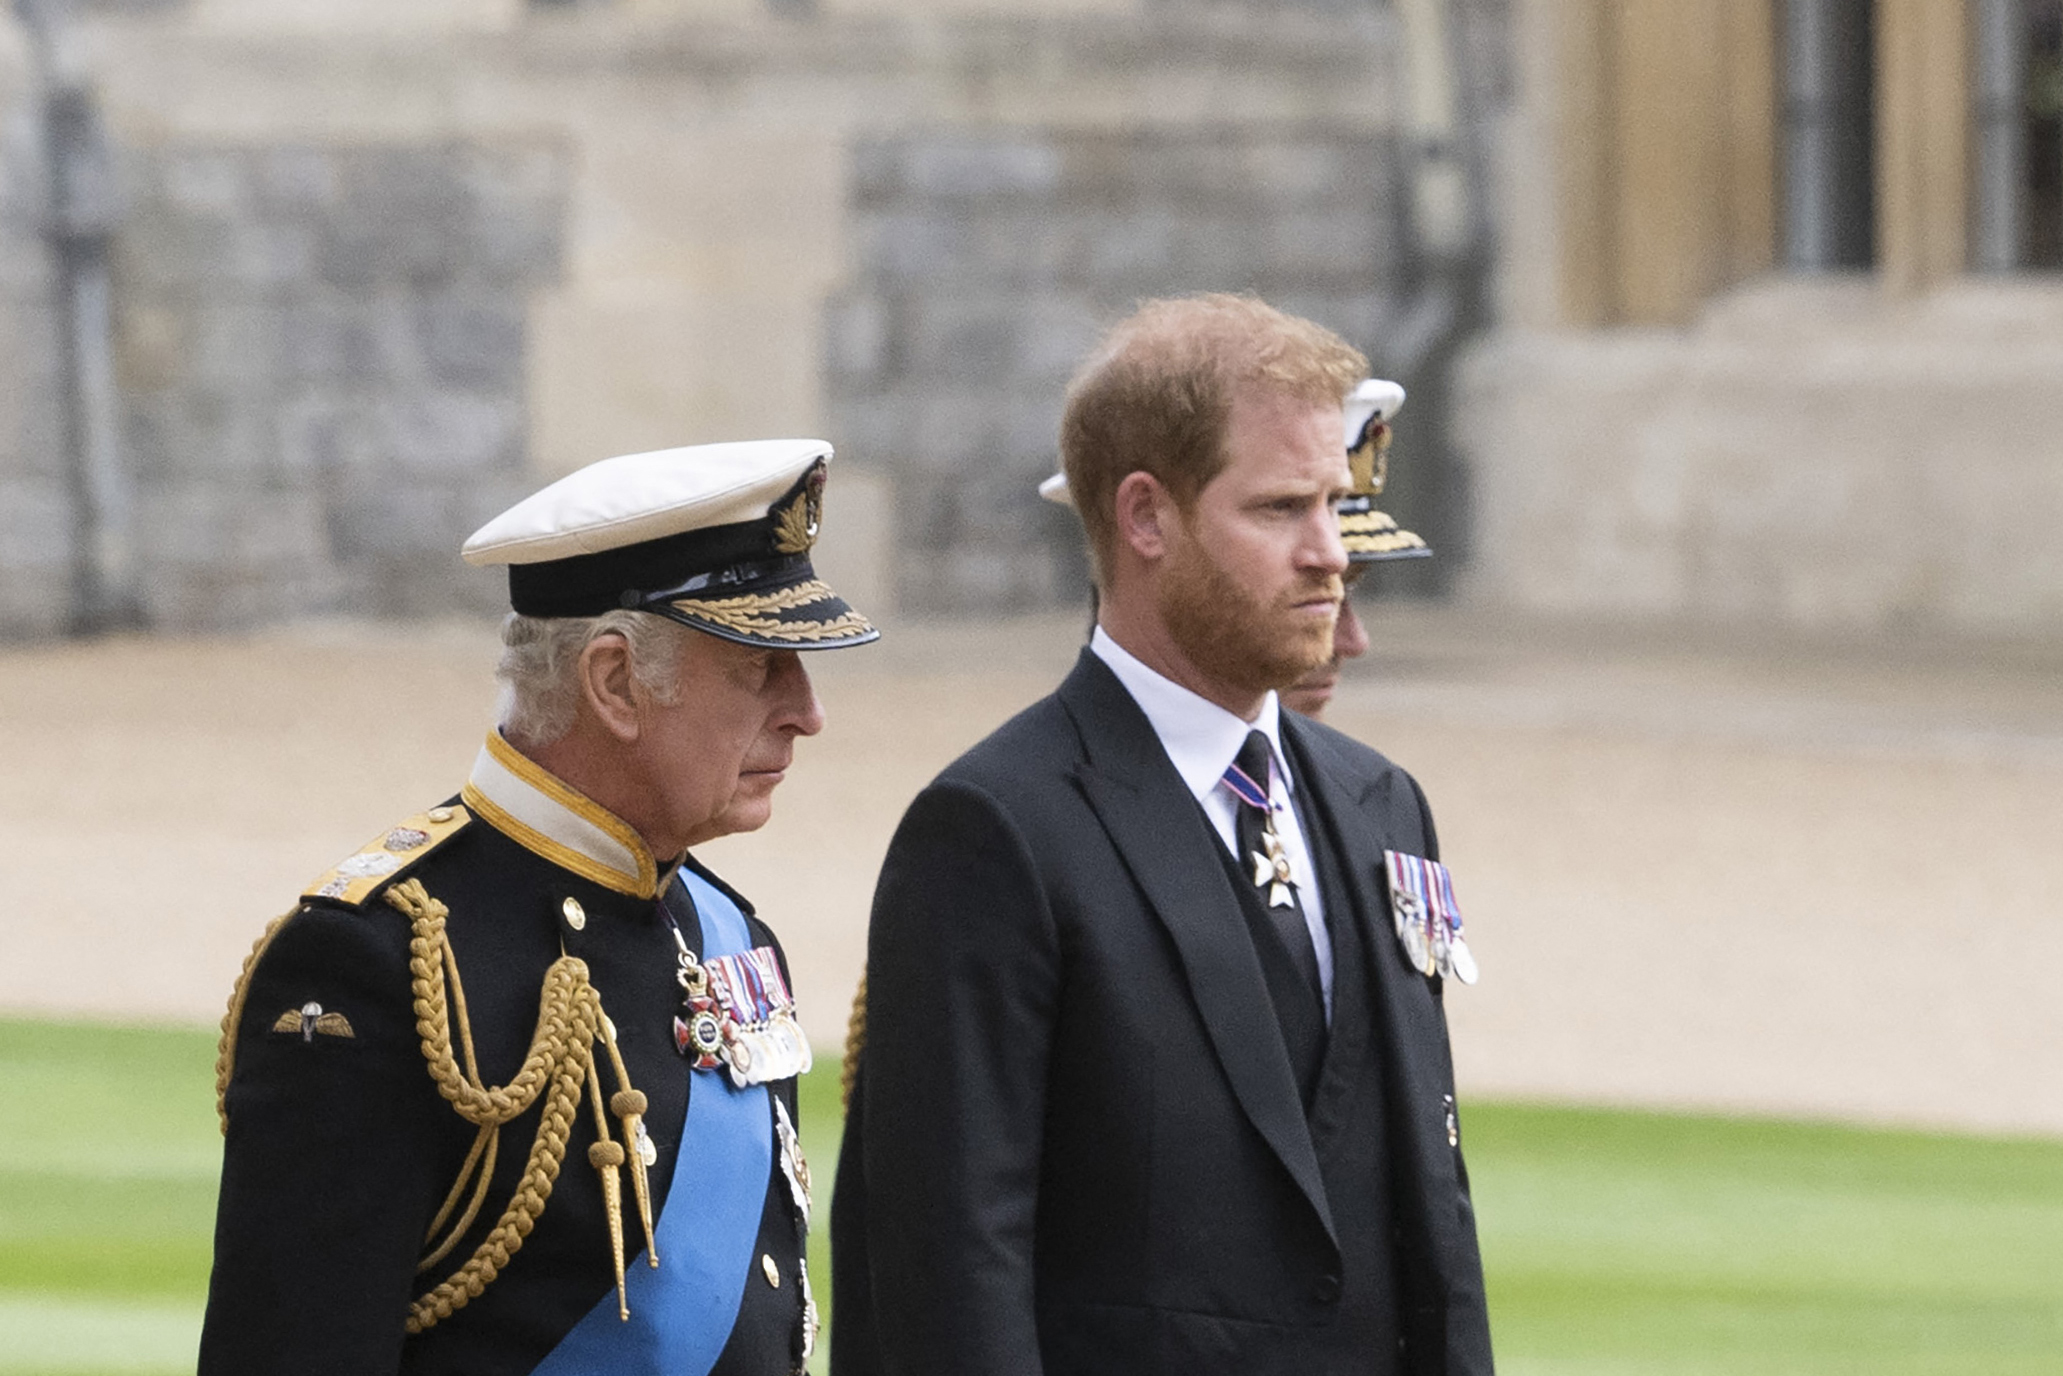 King Charles III with his son Prince Harry arrive at St George's Chapel in Windsor Castle on September 19, 2022, ahead of the Committal Service for Queen Elizabeth II | Source: Getty Images